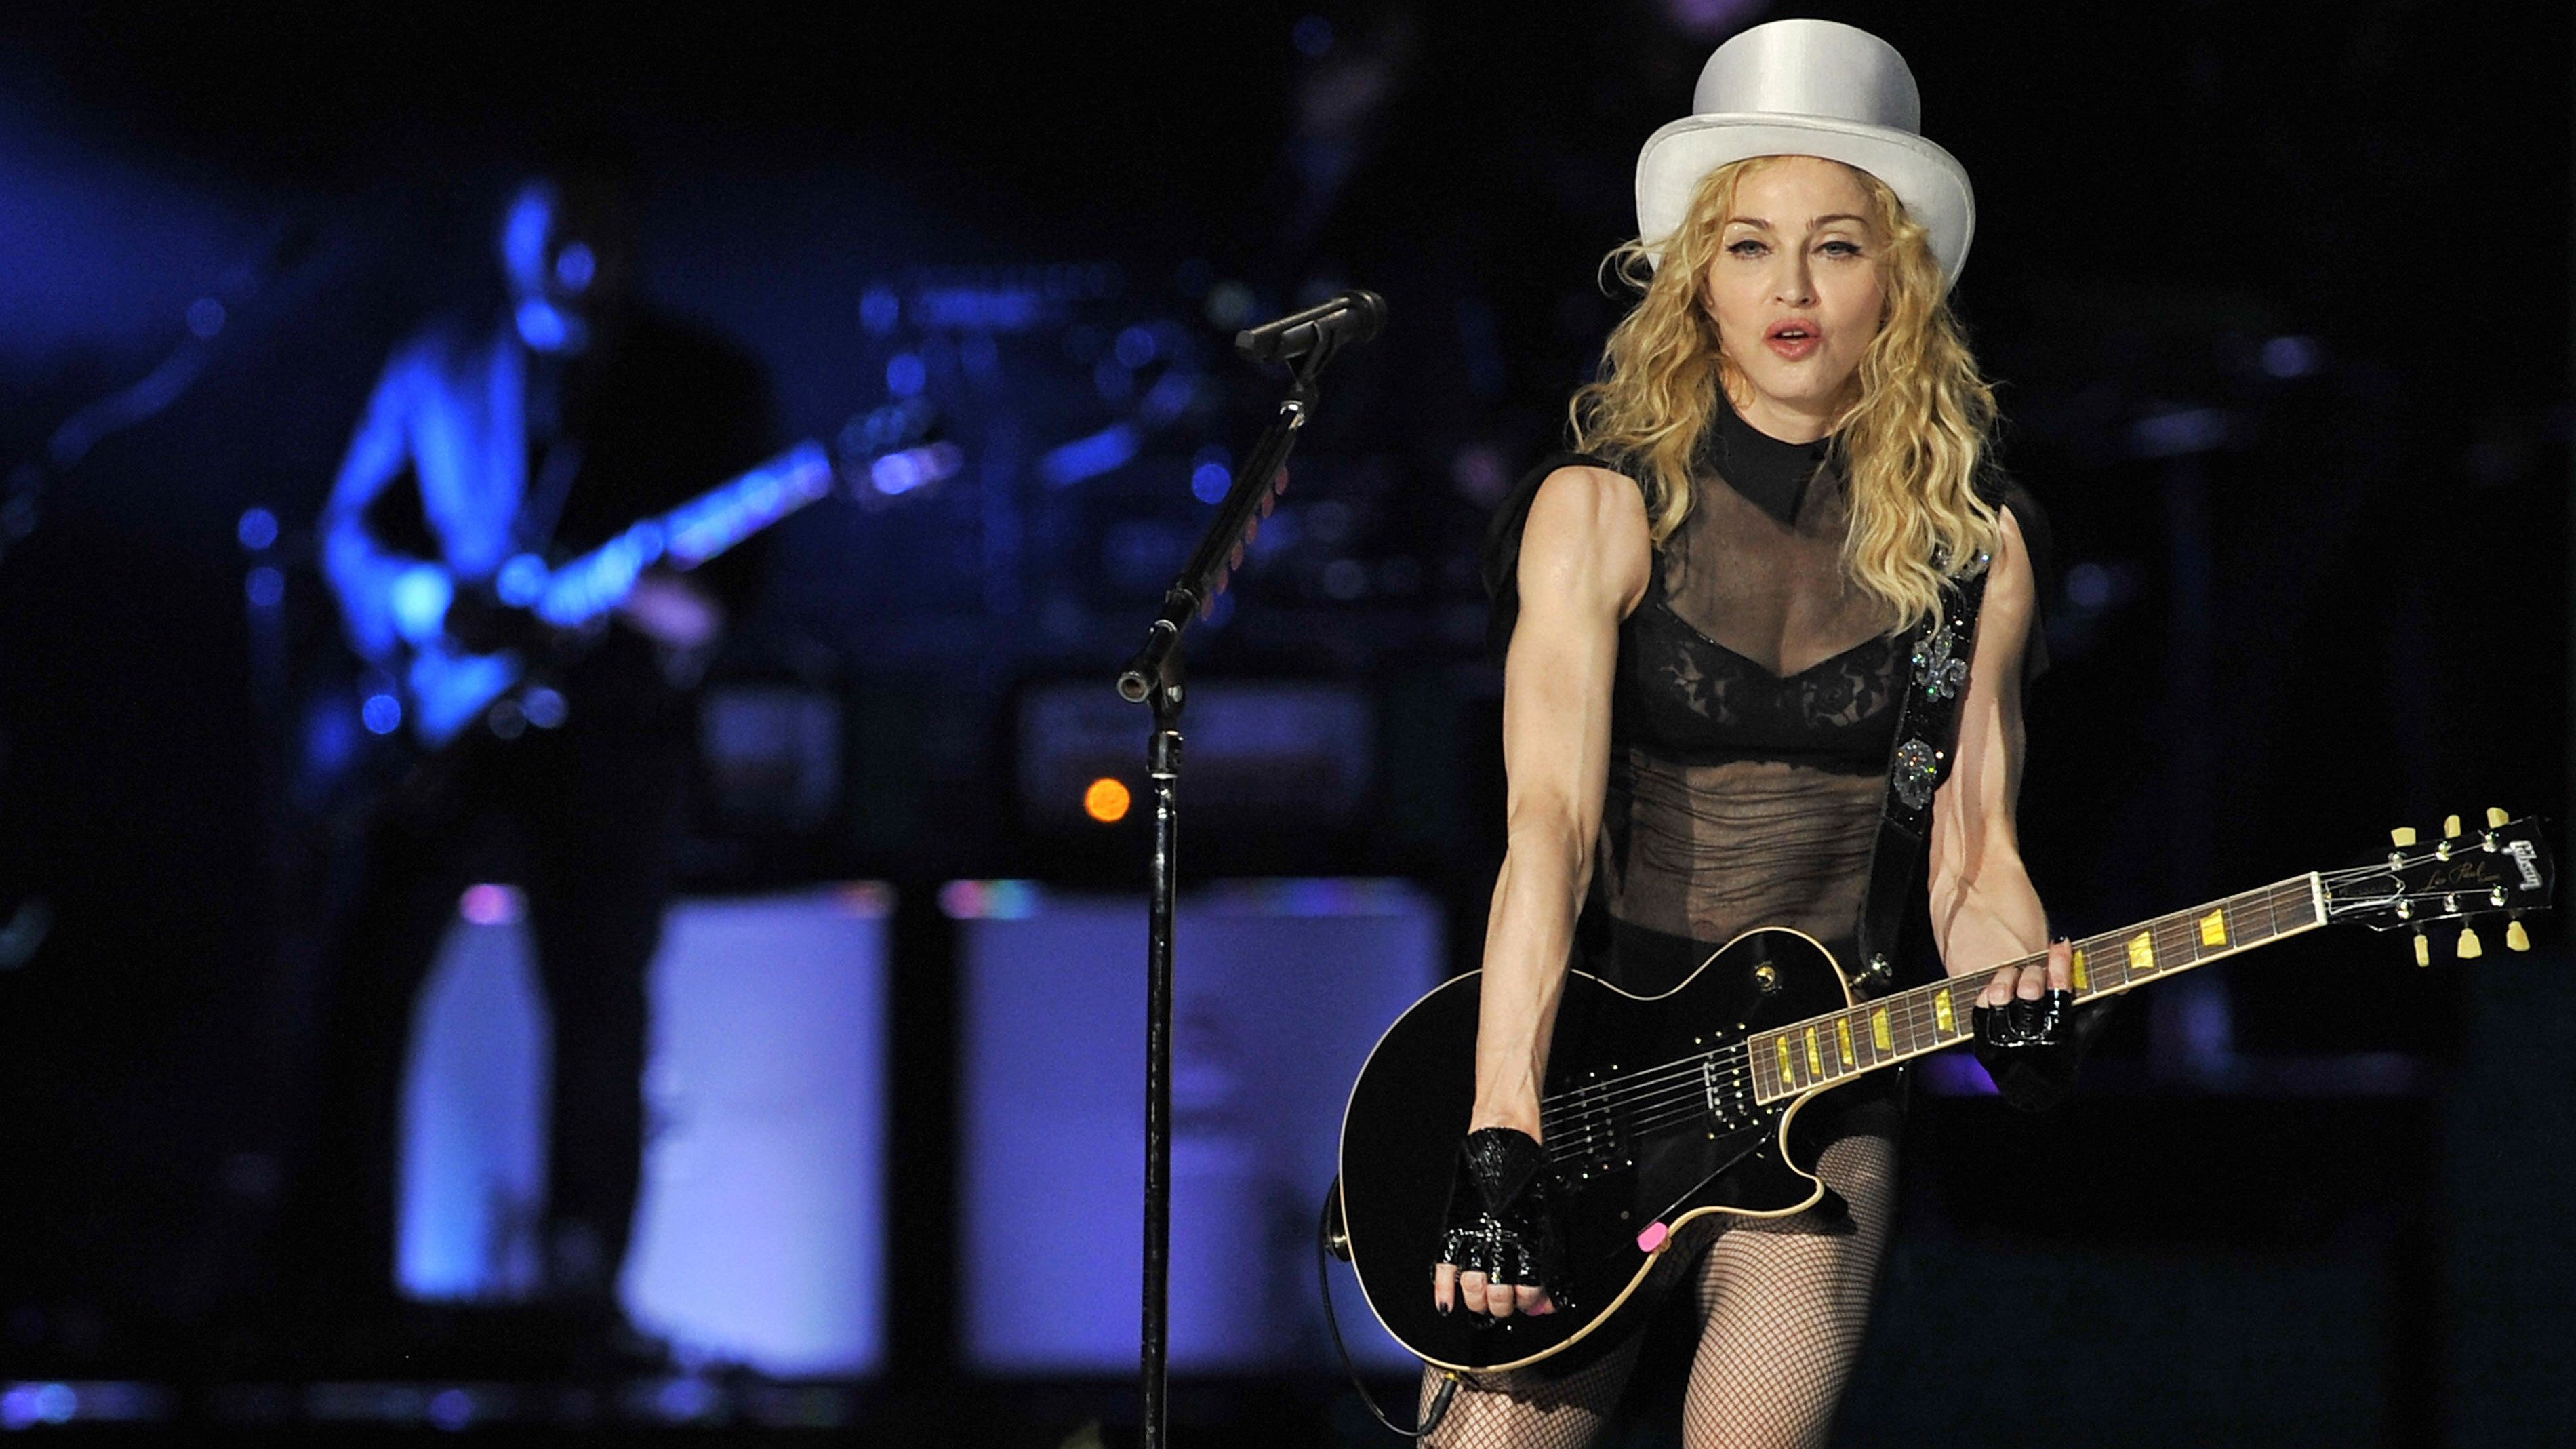 The NFL announced Sunday night that Madonna will perform at the next Super Bowl.